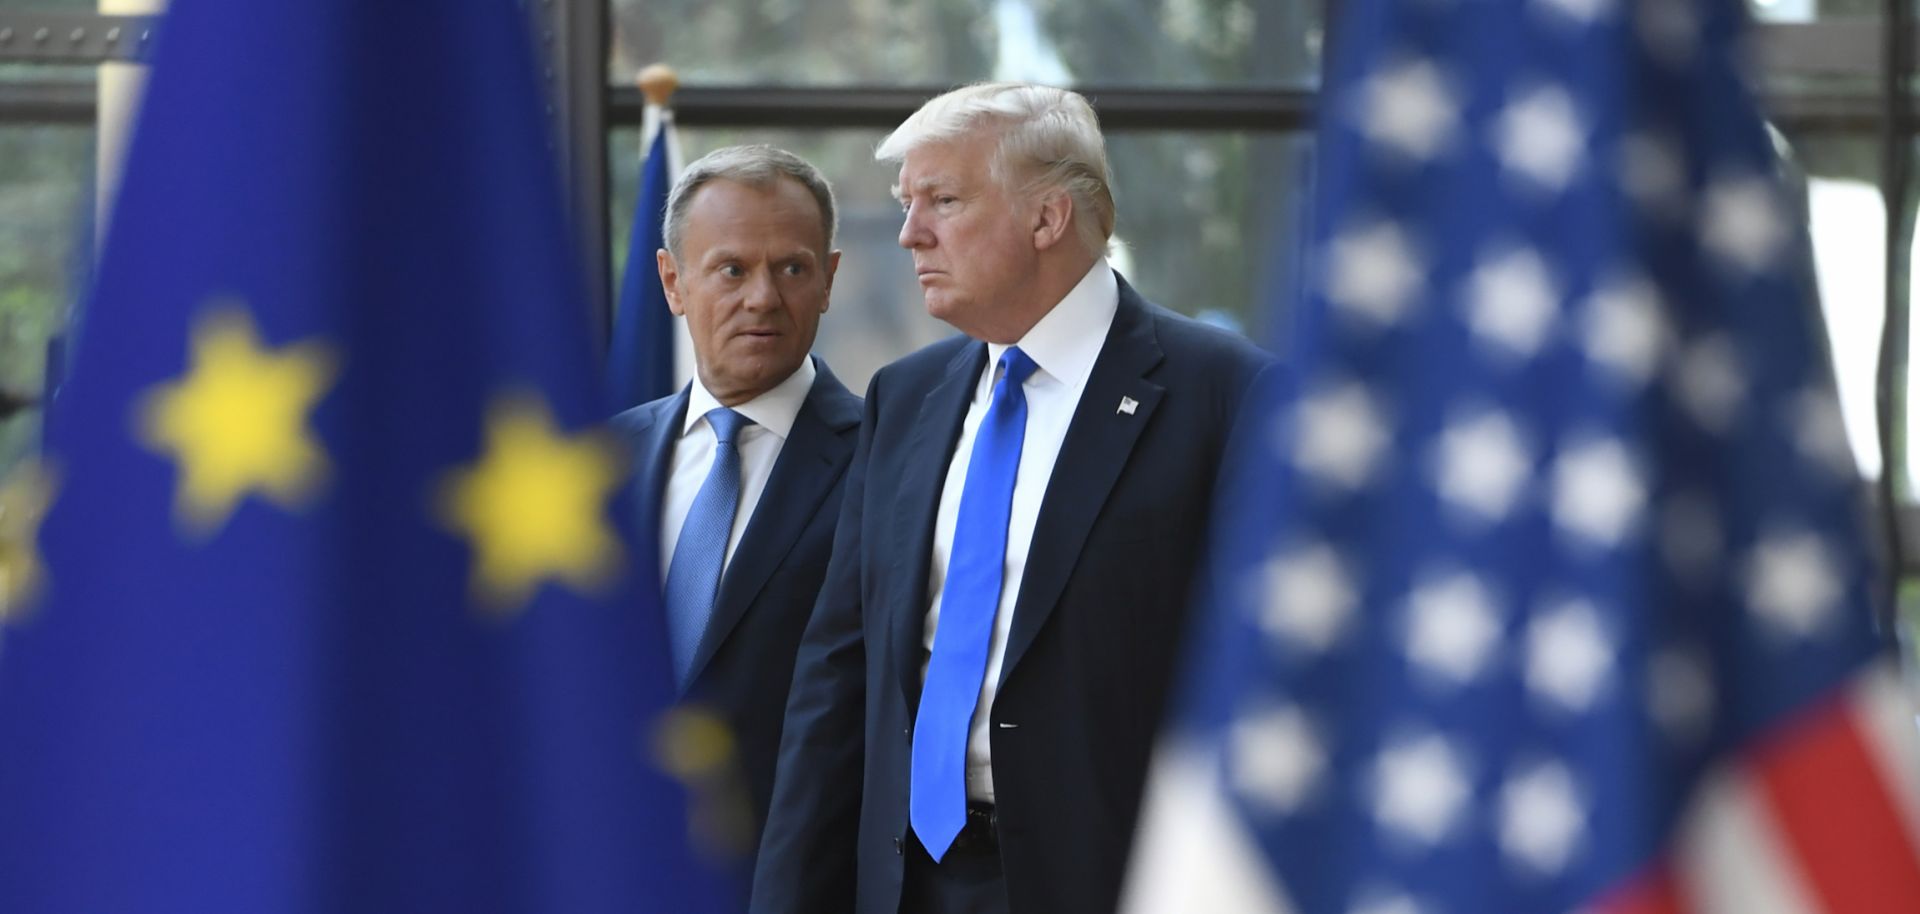 Donald Tusk (L), president of the European Council, welcomes U.S. President Donald Trump to EU headquarters in Brussels for a NATO meeting in 2017.